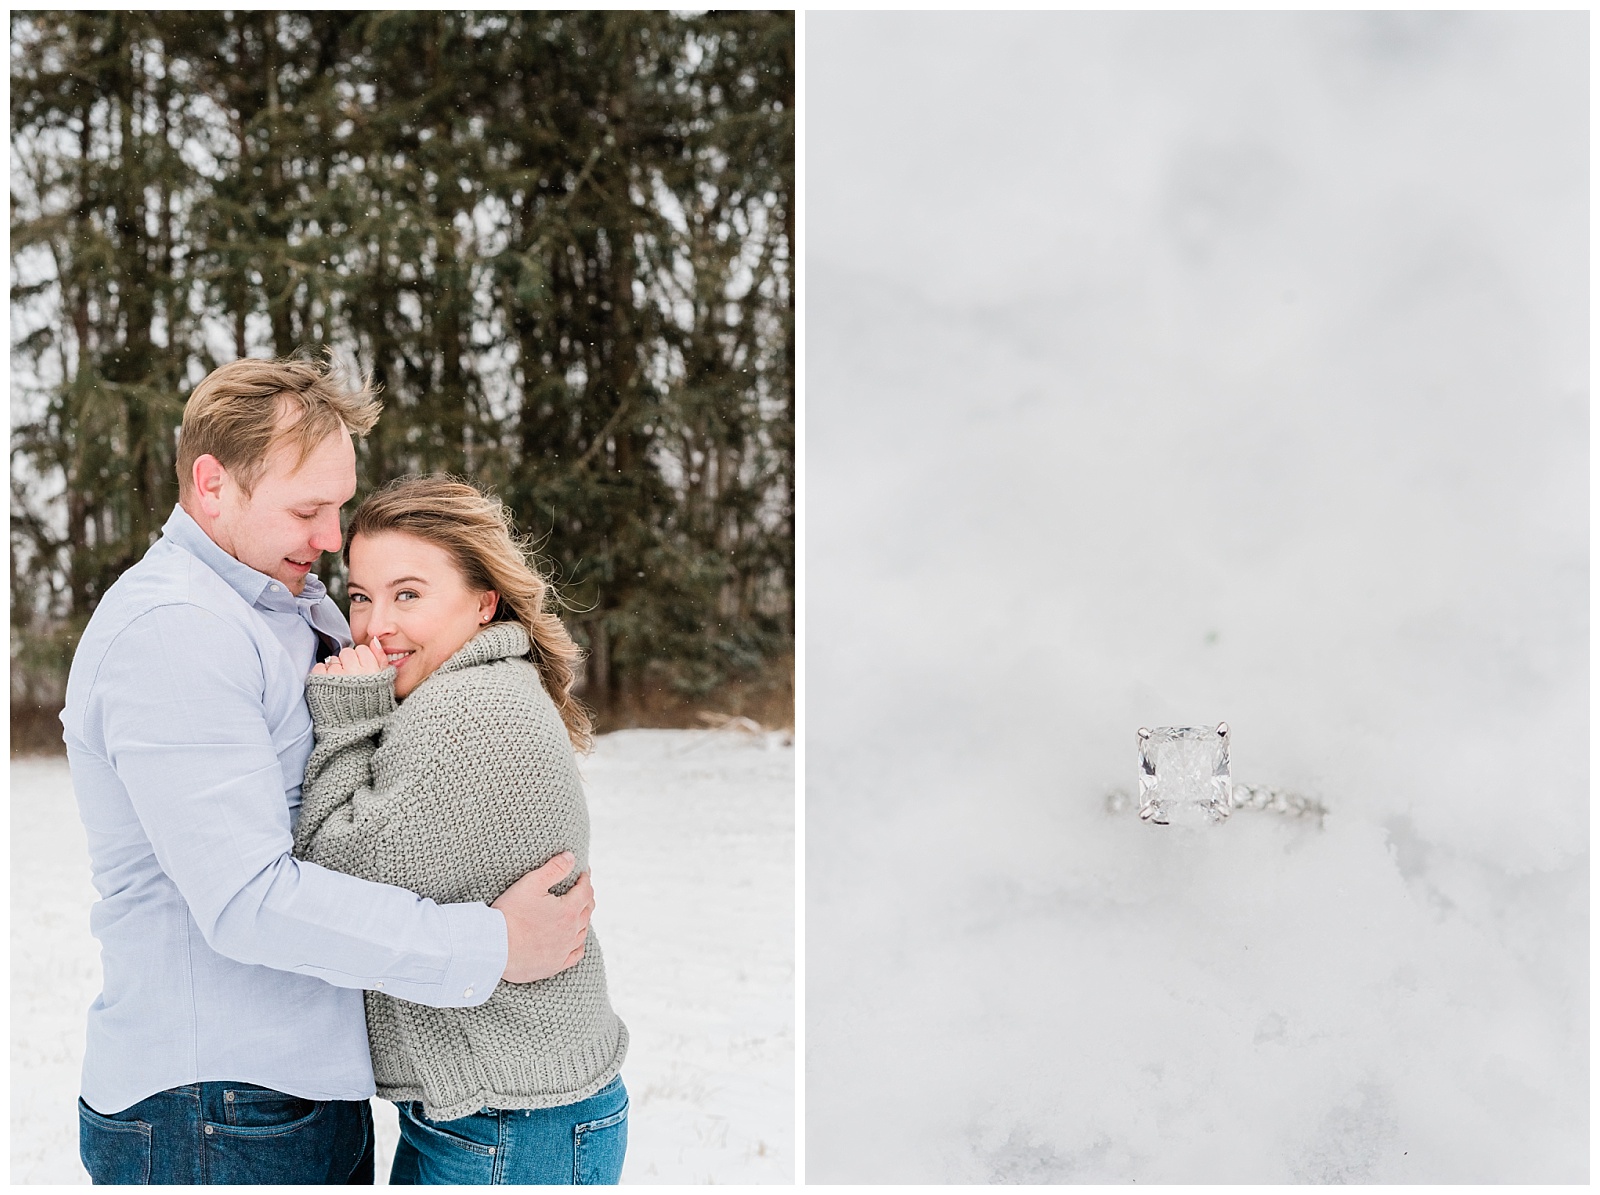 New Jersey Engagement Session, Snowy, Winter, Cozy, Session, Wedding Photographer, Cross Estate Gardens, Snow, Wintry, Light and Airy, Ring